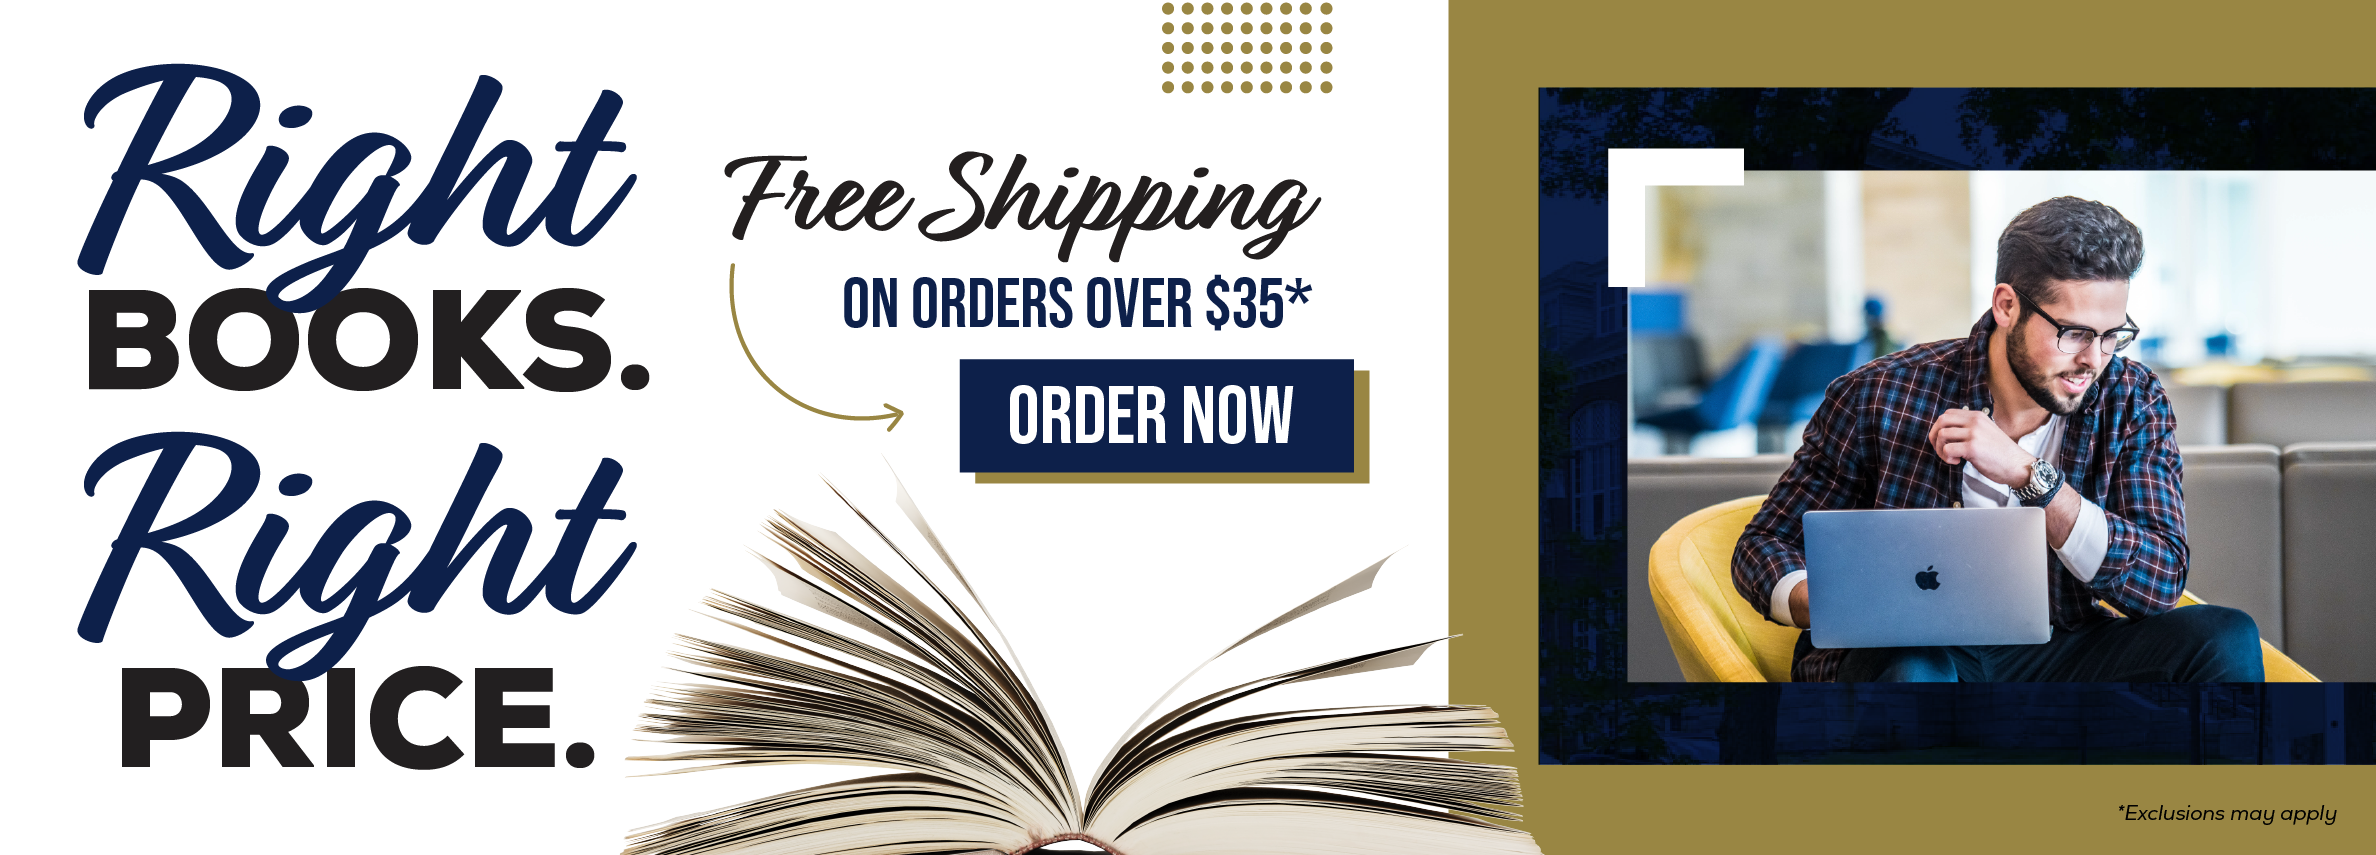 Right books. Right price. Free shipping on orders over $35.* Order now. *Exclusions may apply.